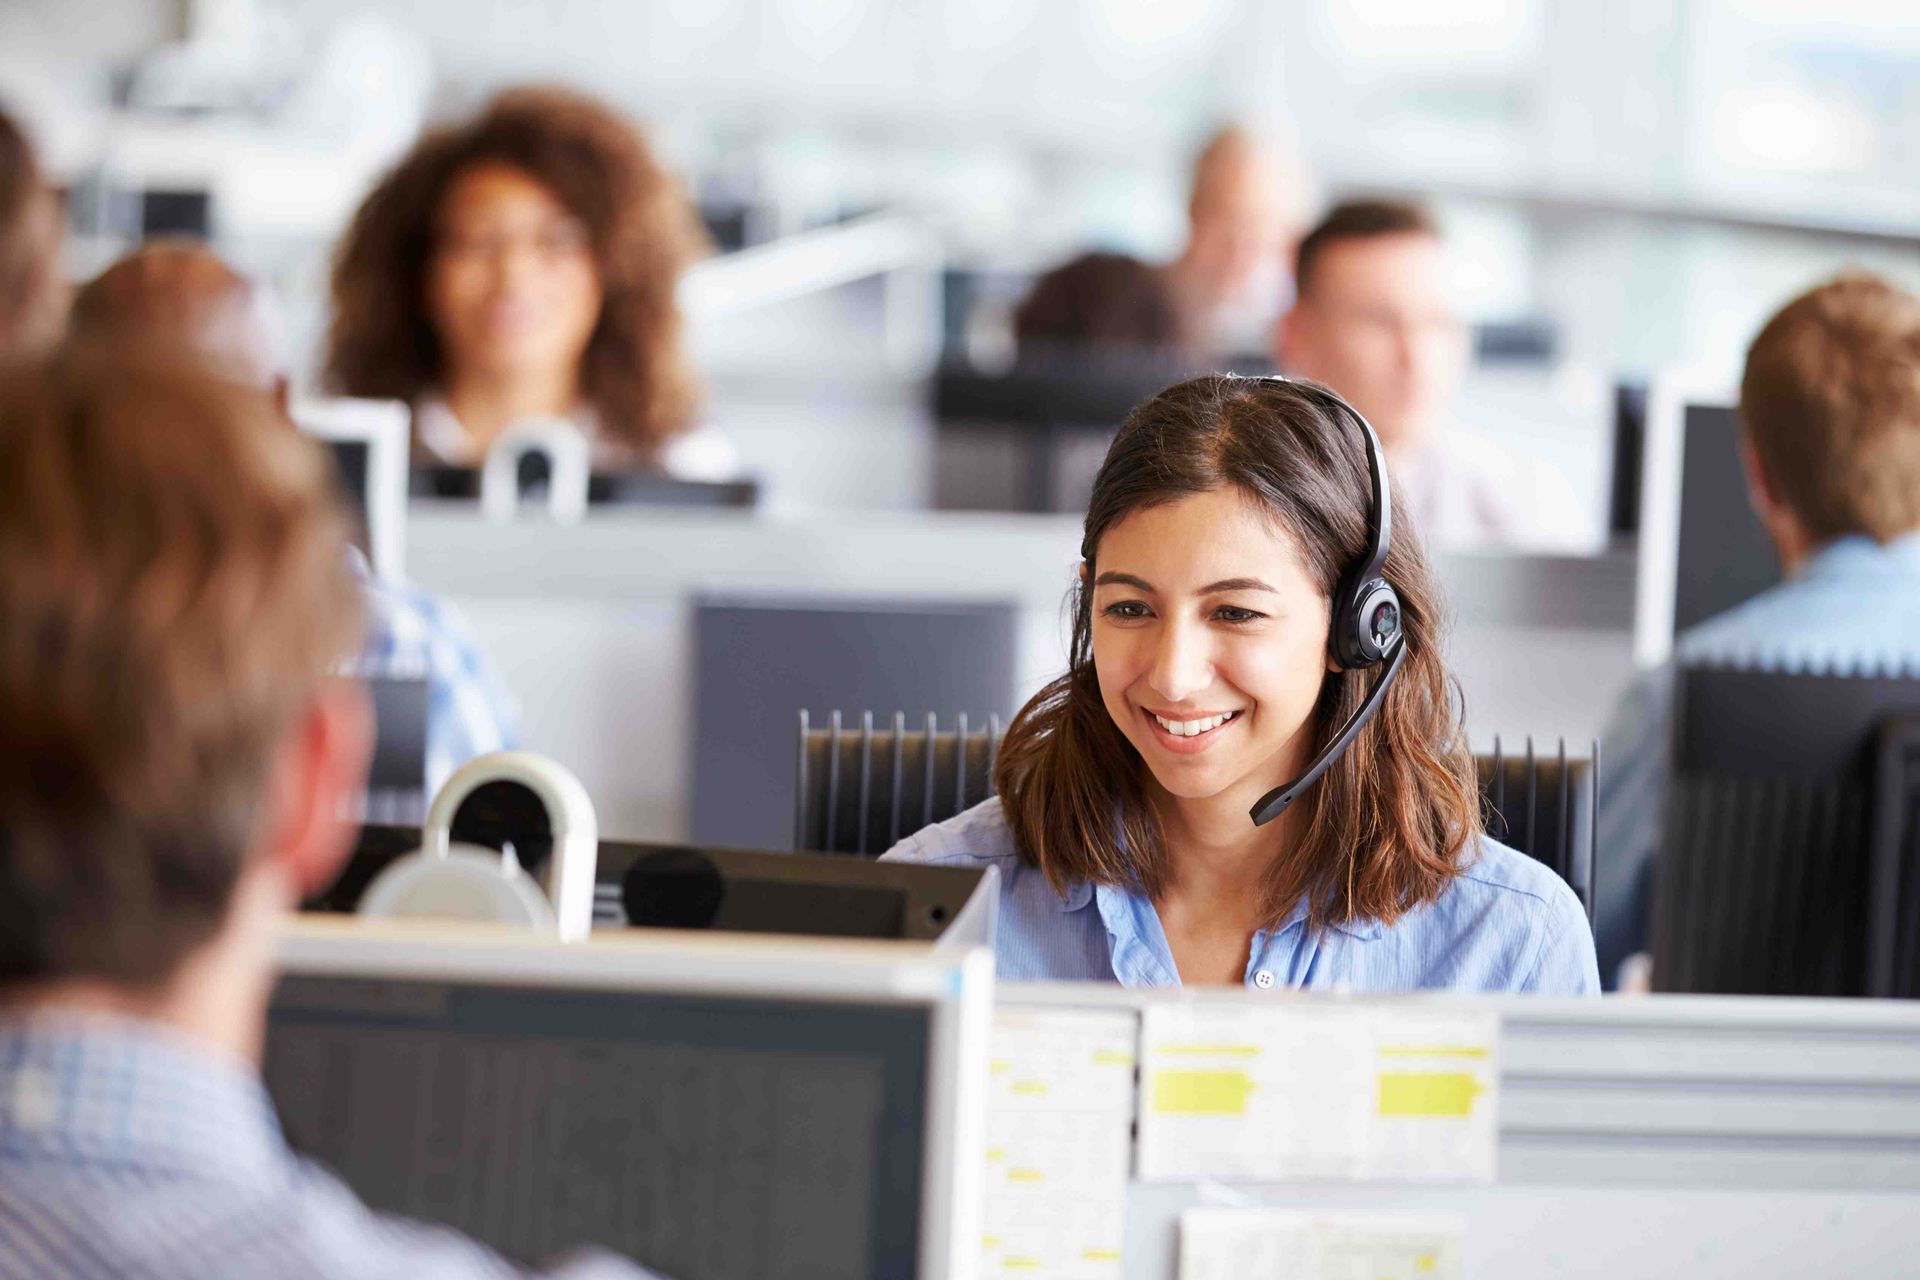  in-house and outsourced call centers